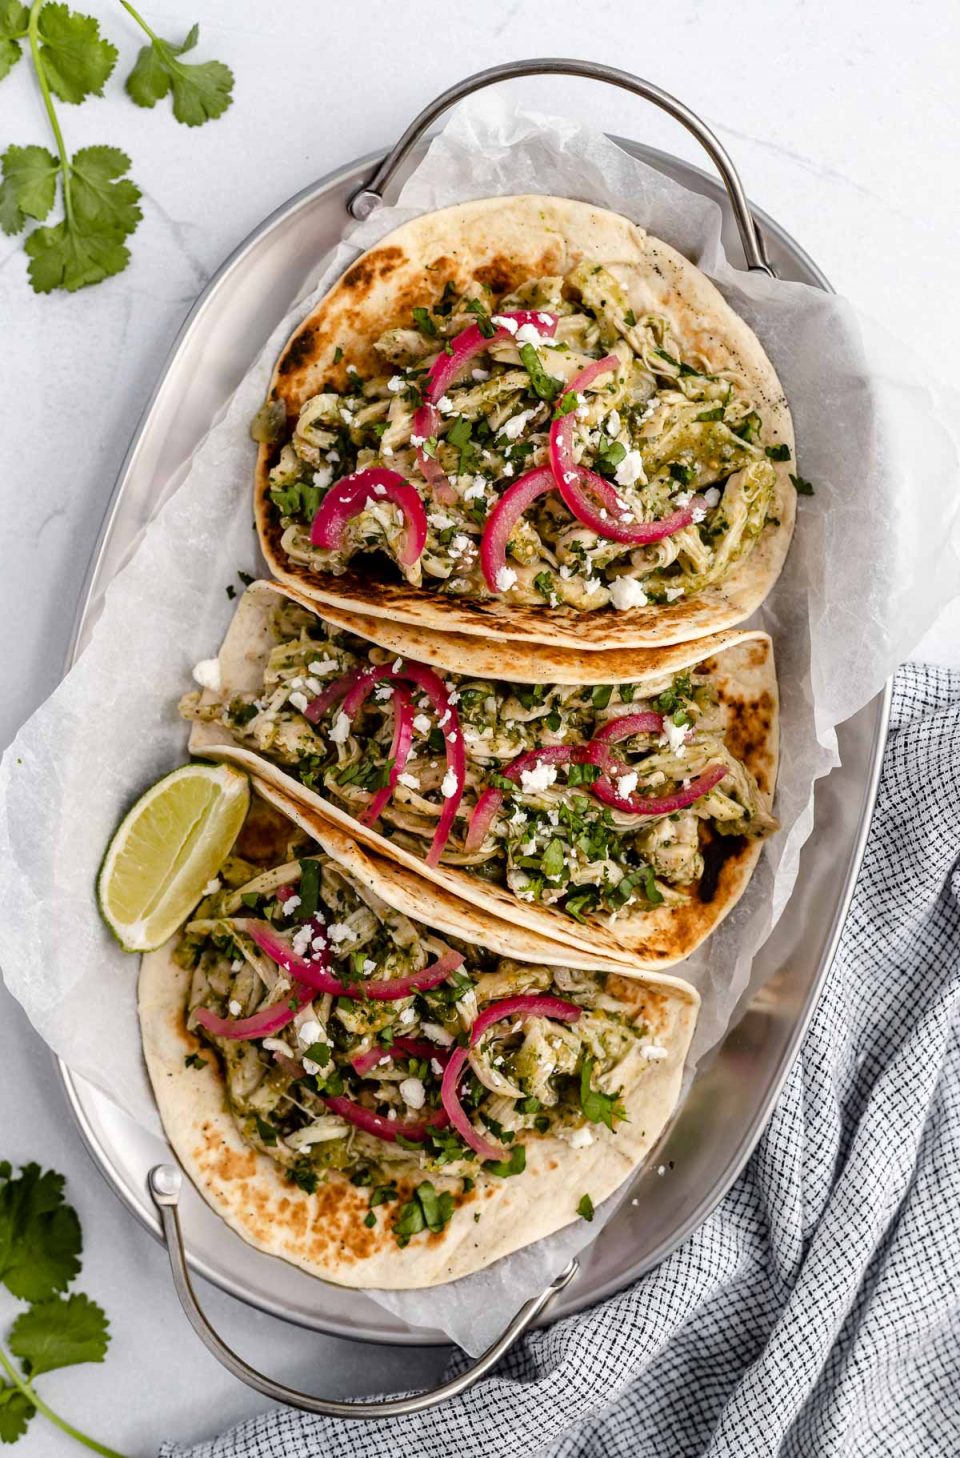 Shredded salsa verde chicken (pollo verde) shown in 3 tacos. The tacos are topped with chopped cilantro and pickled red onions, placed on a metal tray with handles. The tray sits atop a light blue surface, next to a checkered blue linen napkin & a few cilantro leaves.